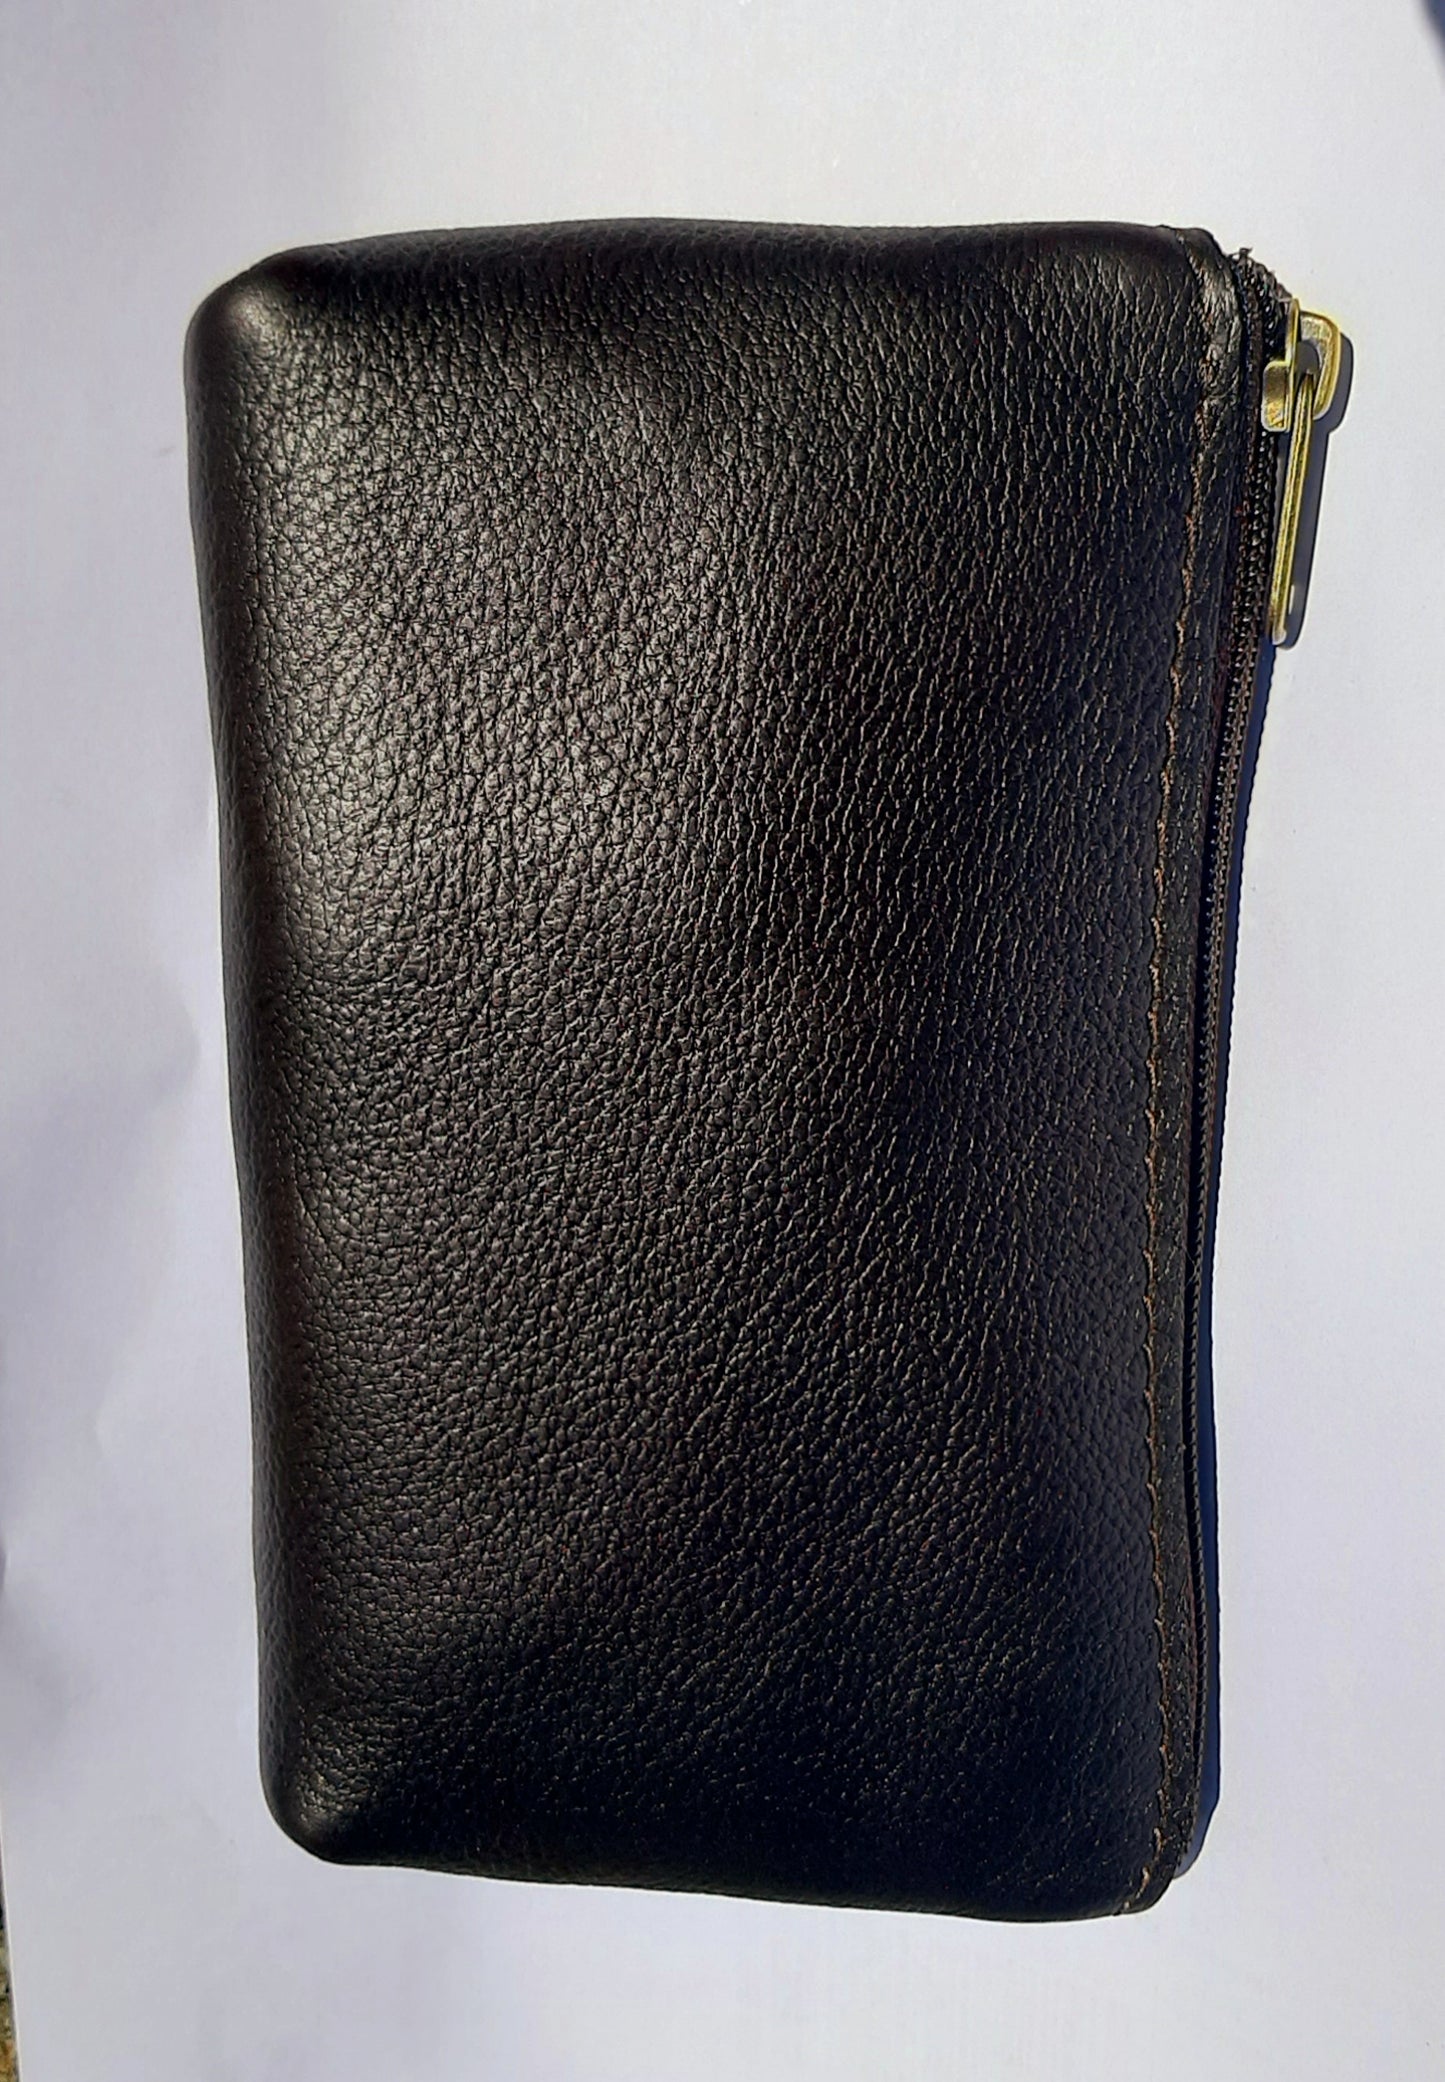 A beautiful genuine leather makeup purse in dark/chocolate brown colour 